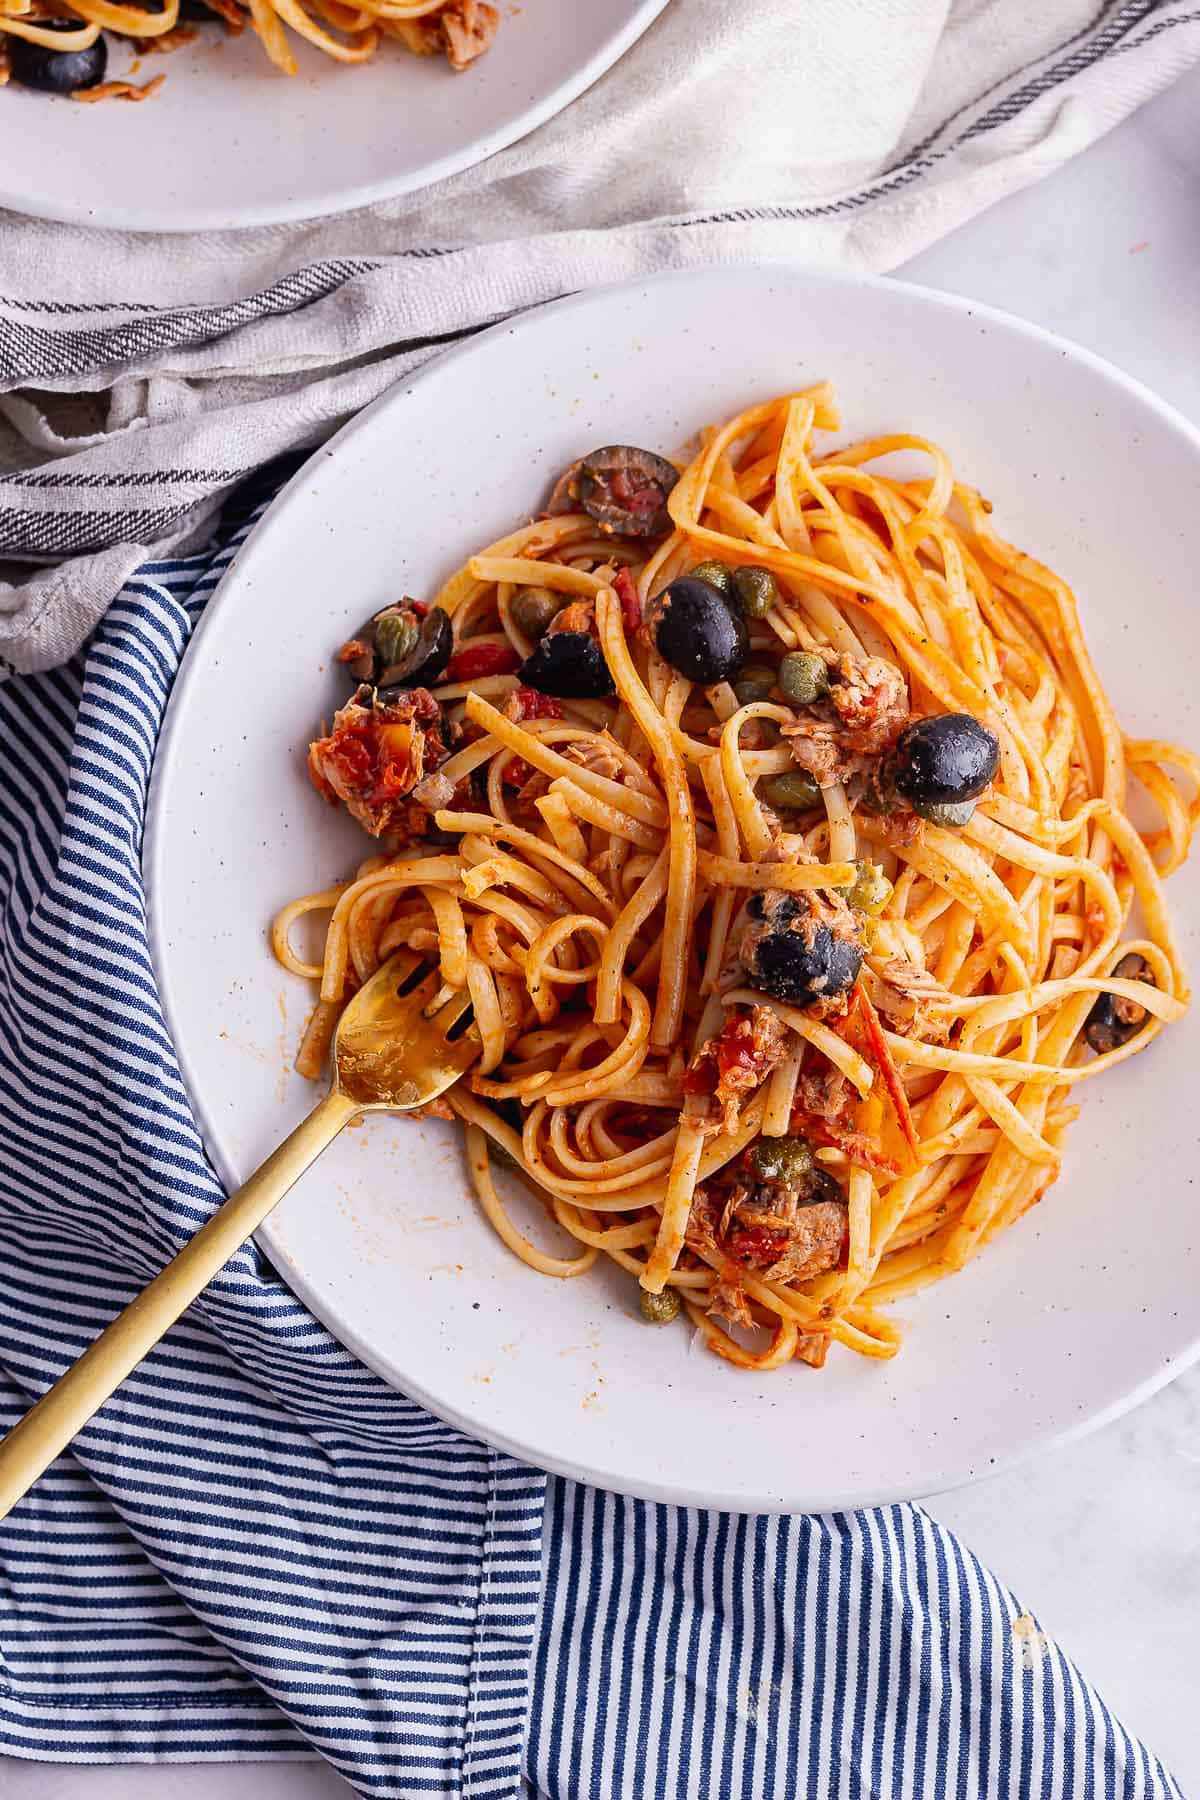 Spaghetti puttanesca flat lay with a gold fork on a striped cloth